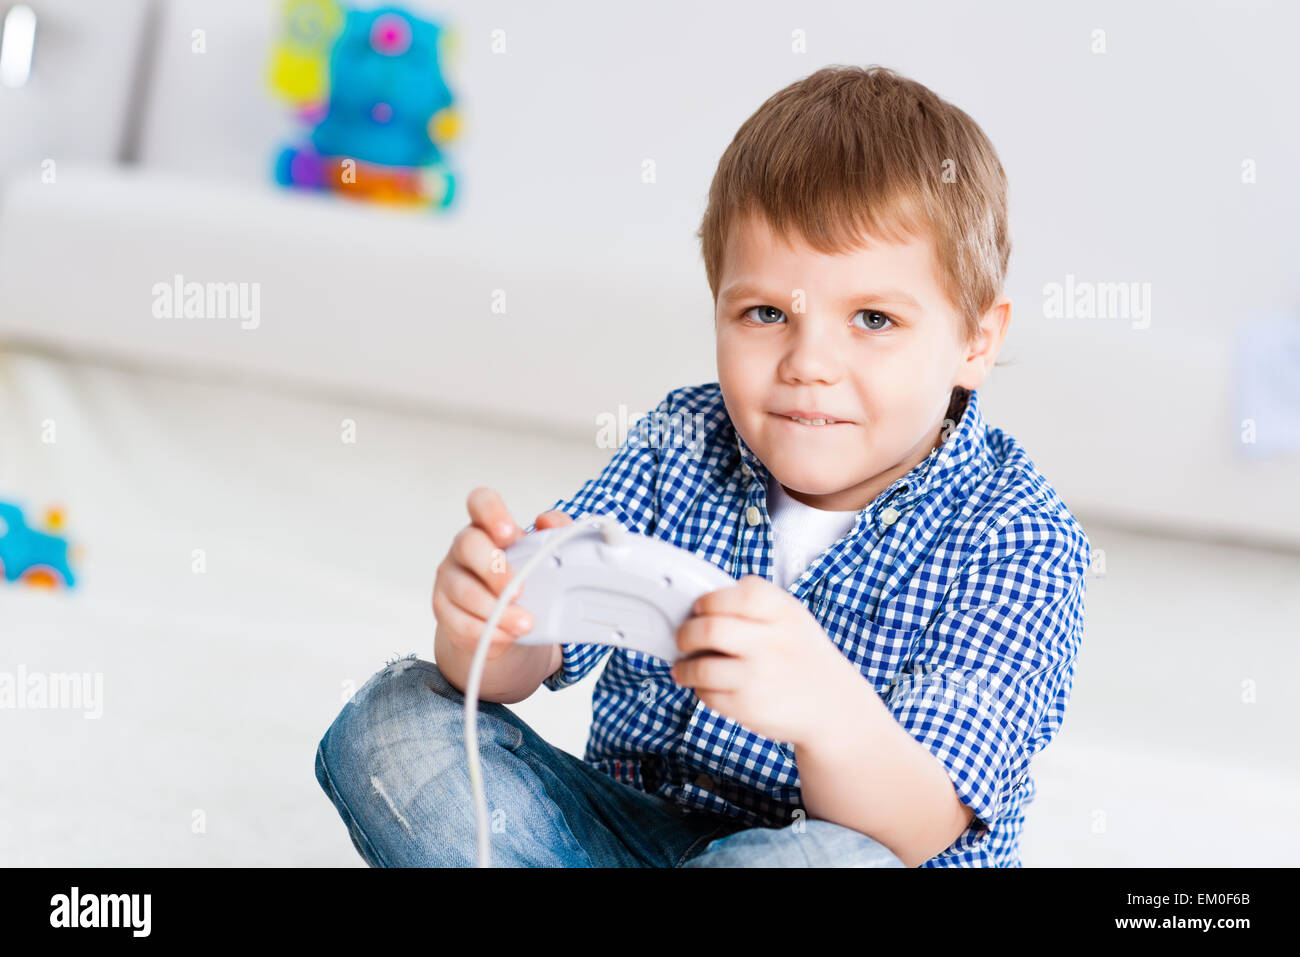 Boy playing on a game console Stock Photo